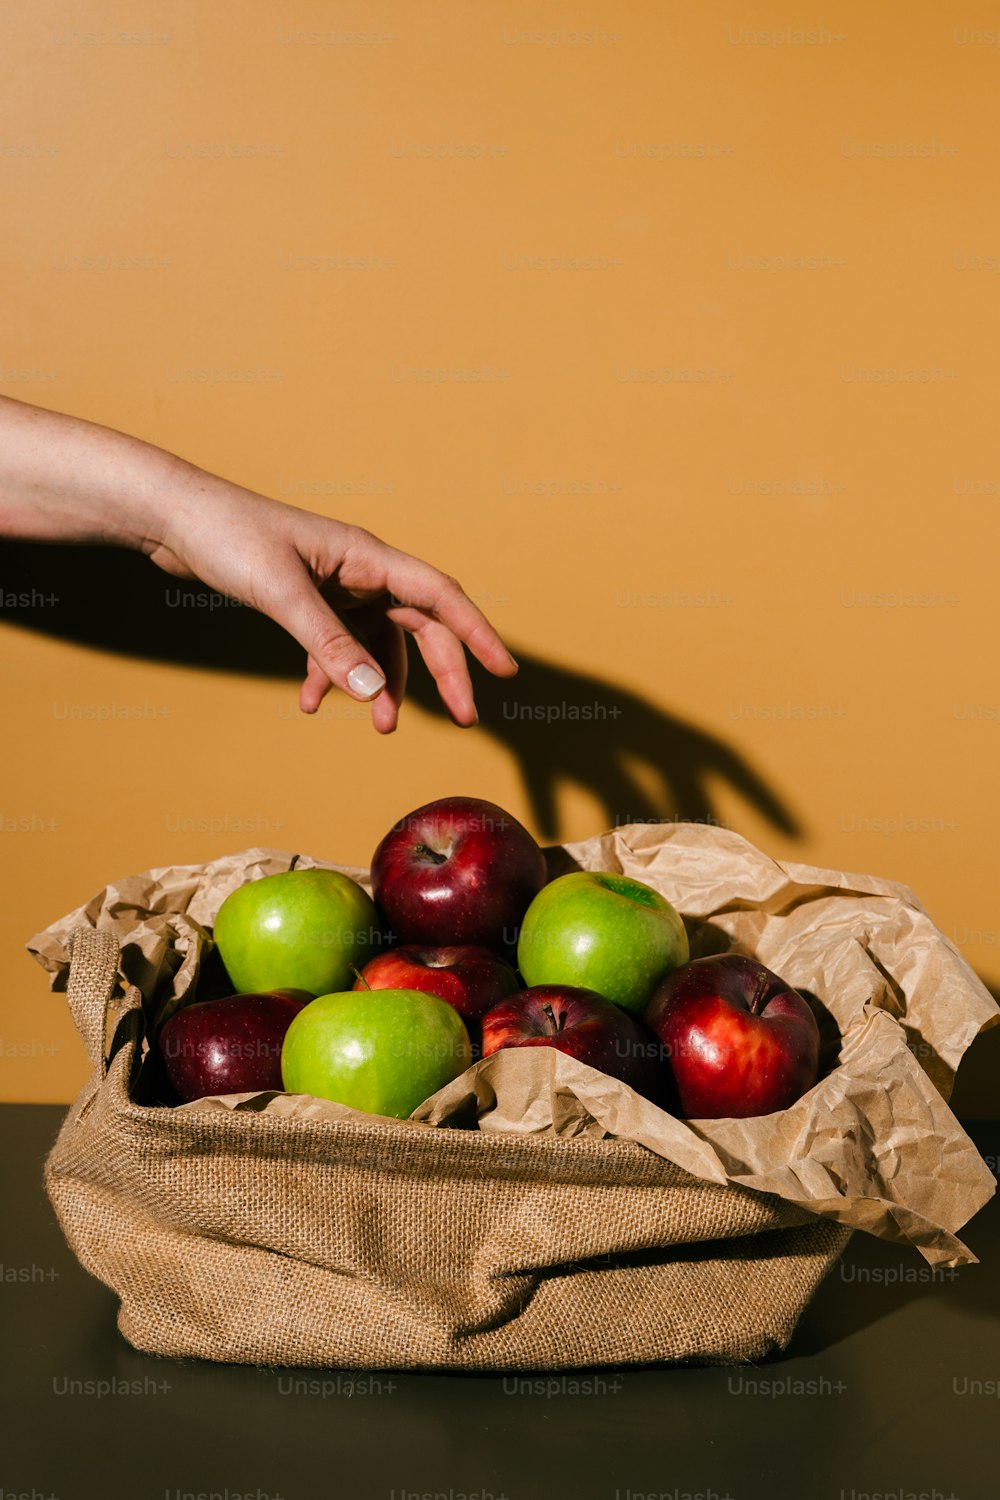 a person reaching for an apple in a bag